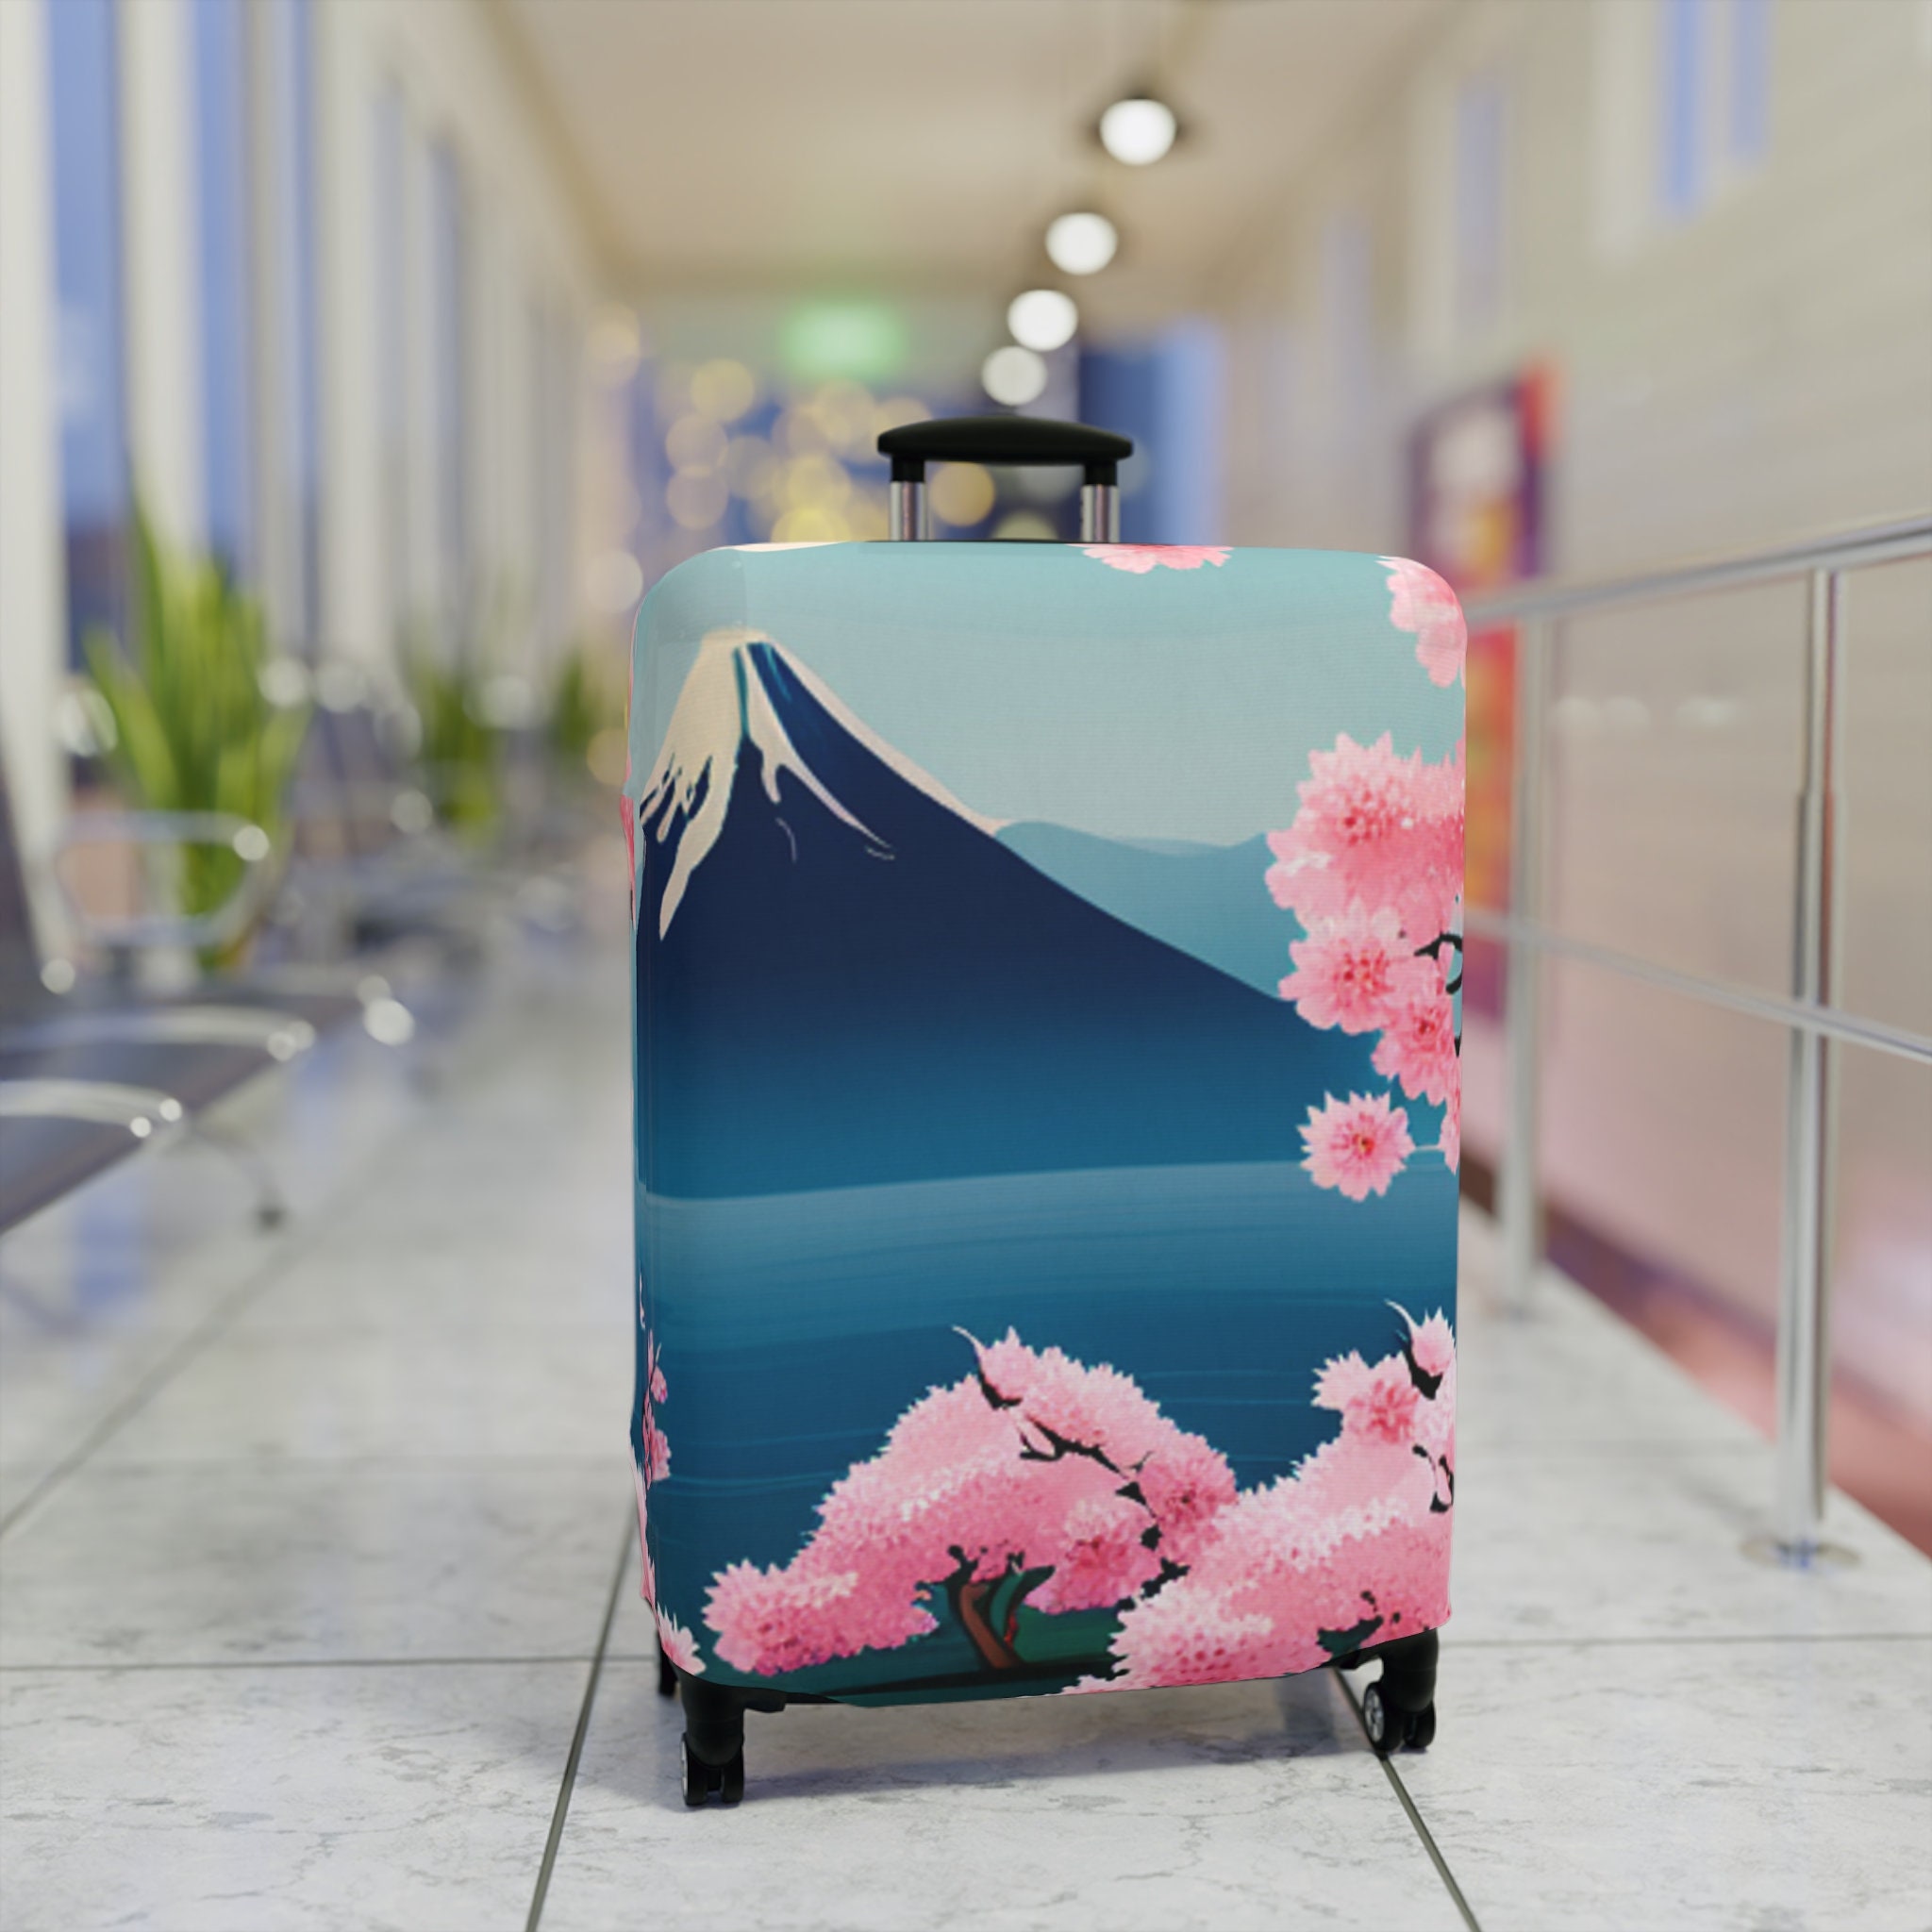 Cherry Blossom Luggage Cover, Colorful Travel Gifts